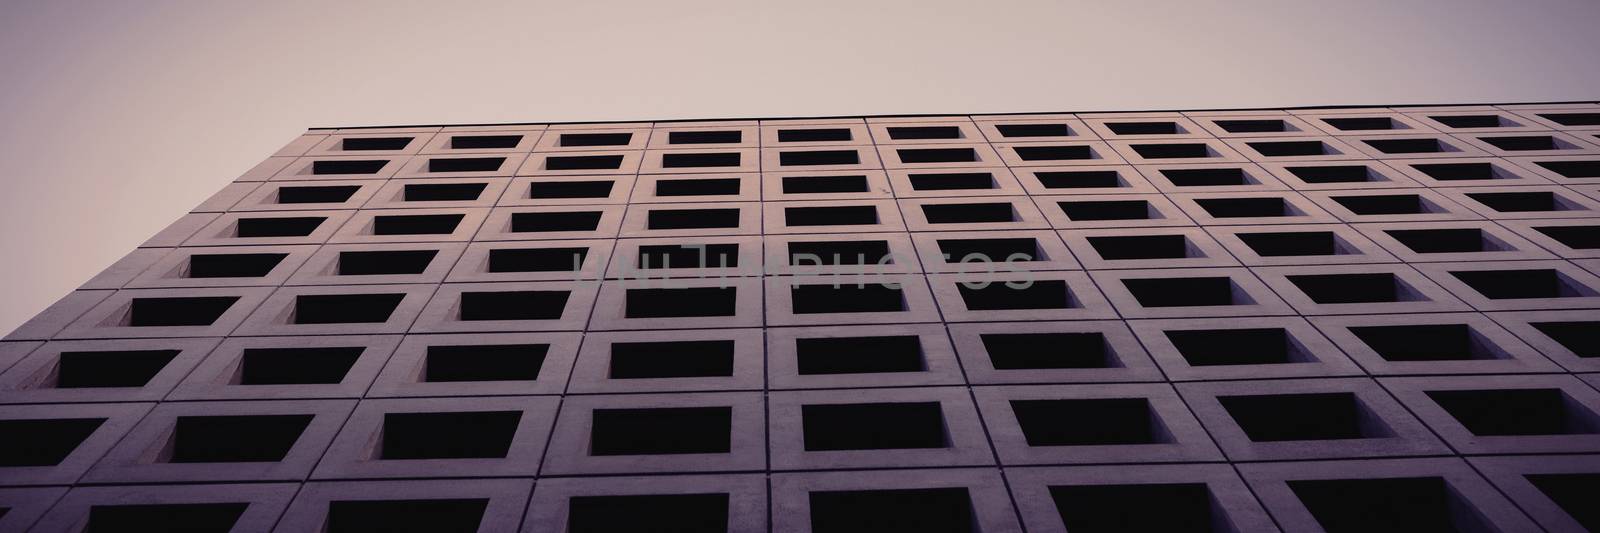 Low angle view of office building by Wavebreakmedia